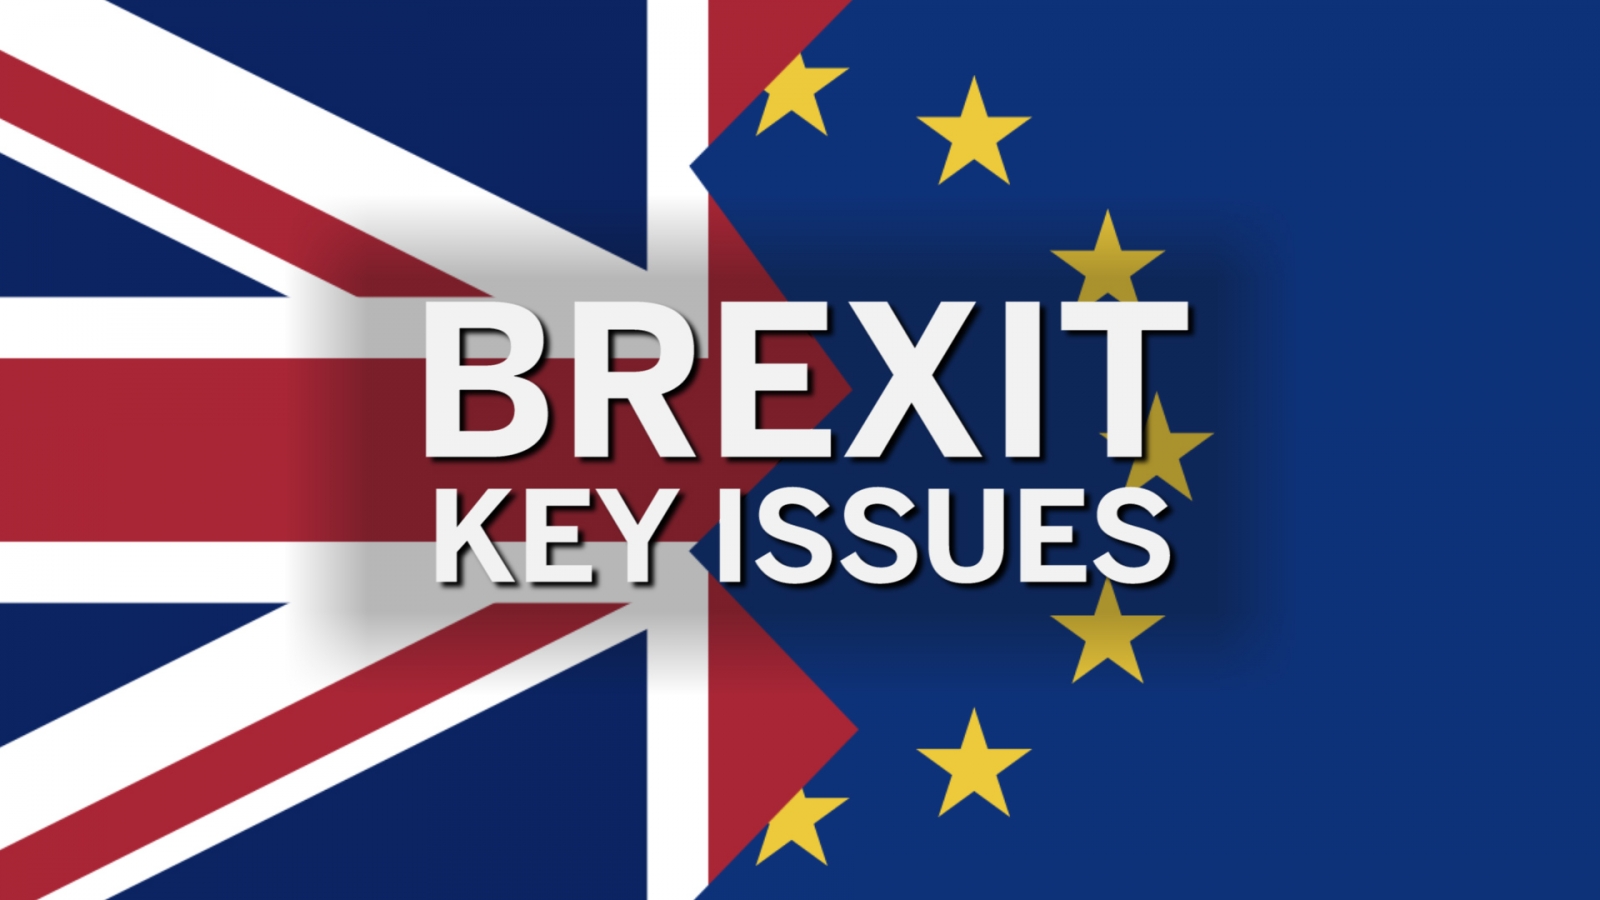 Using suppliers in the EU? How will Brexit impact you and what options do you have?1600 x 900